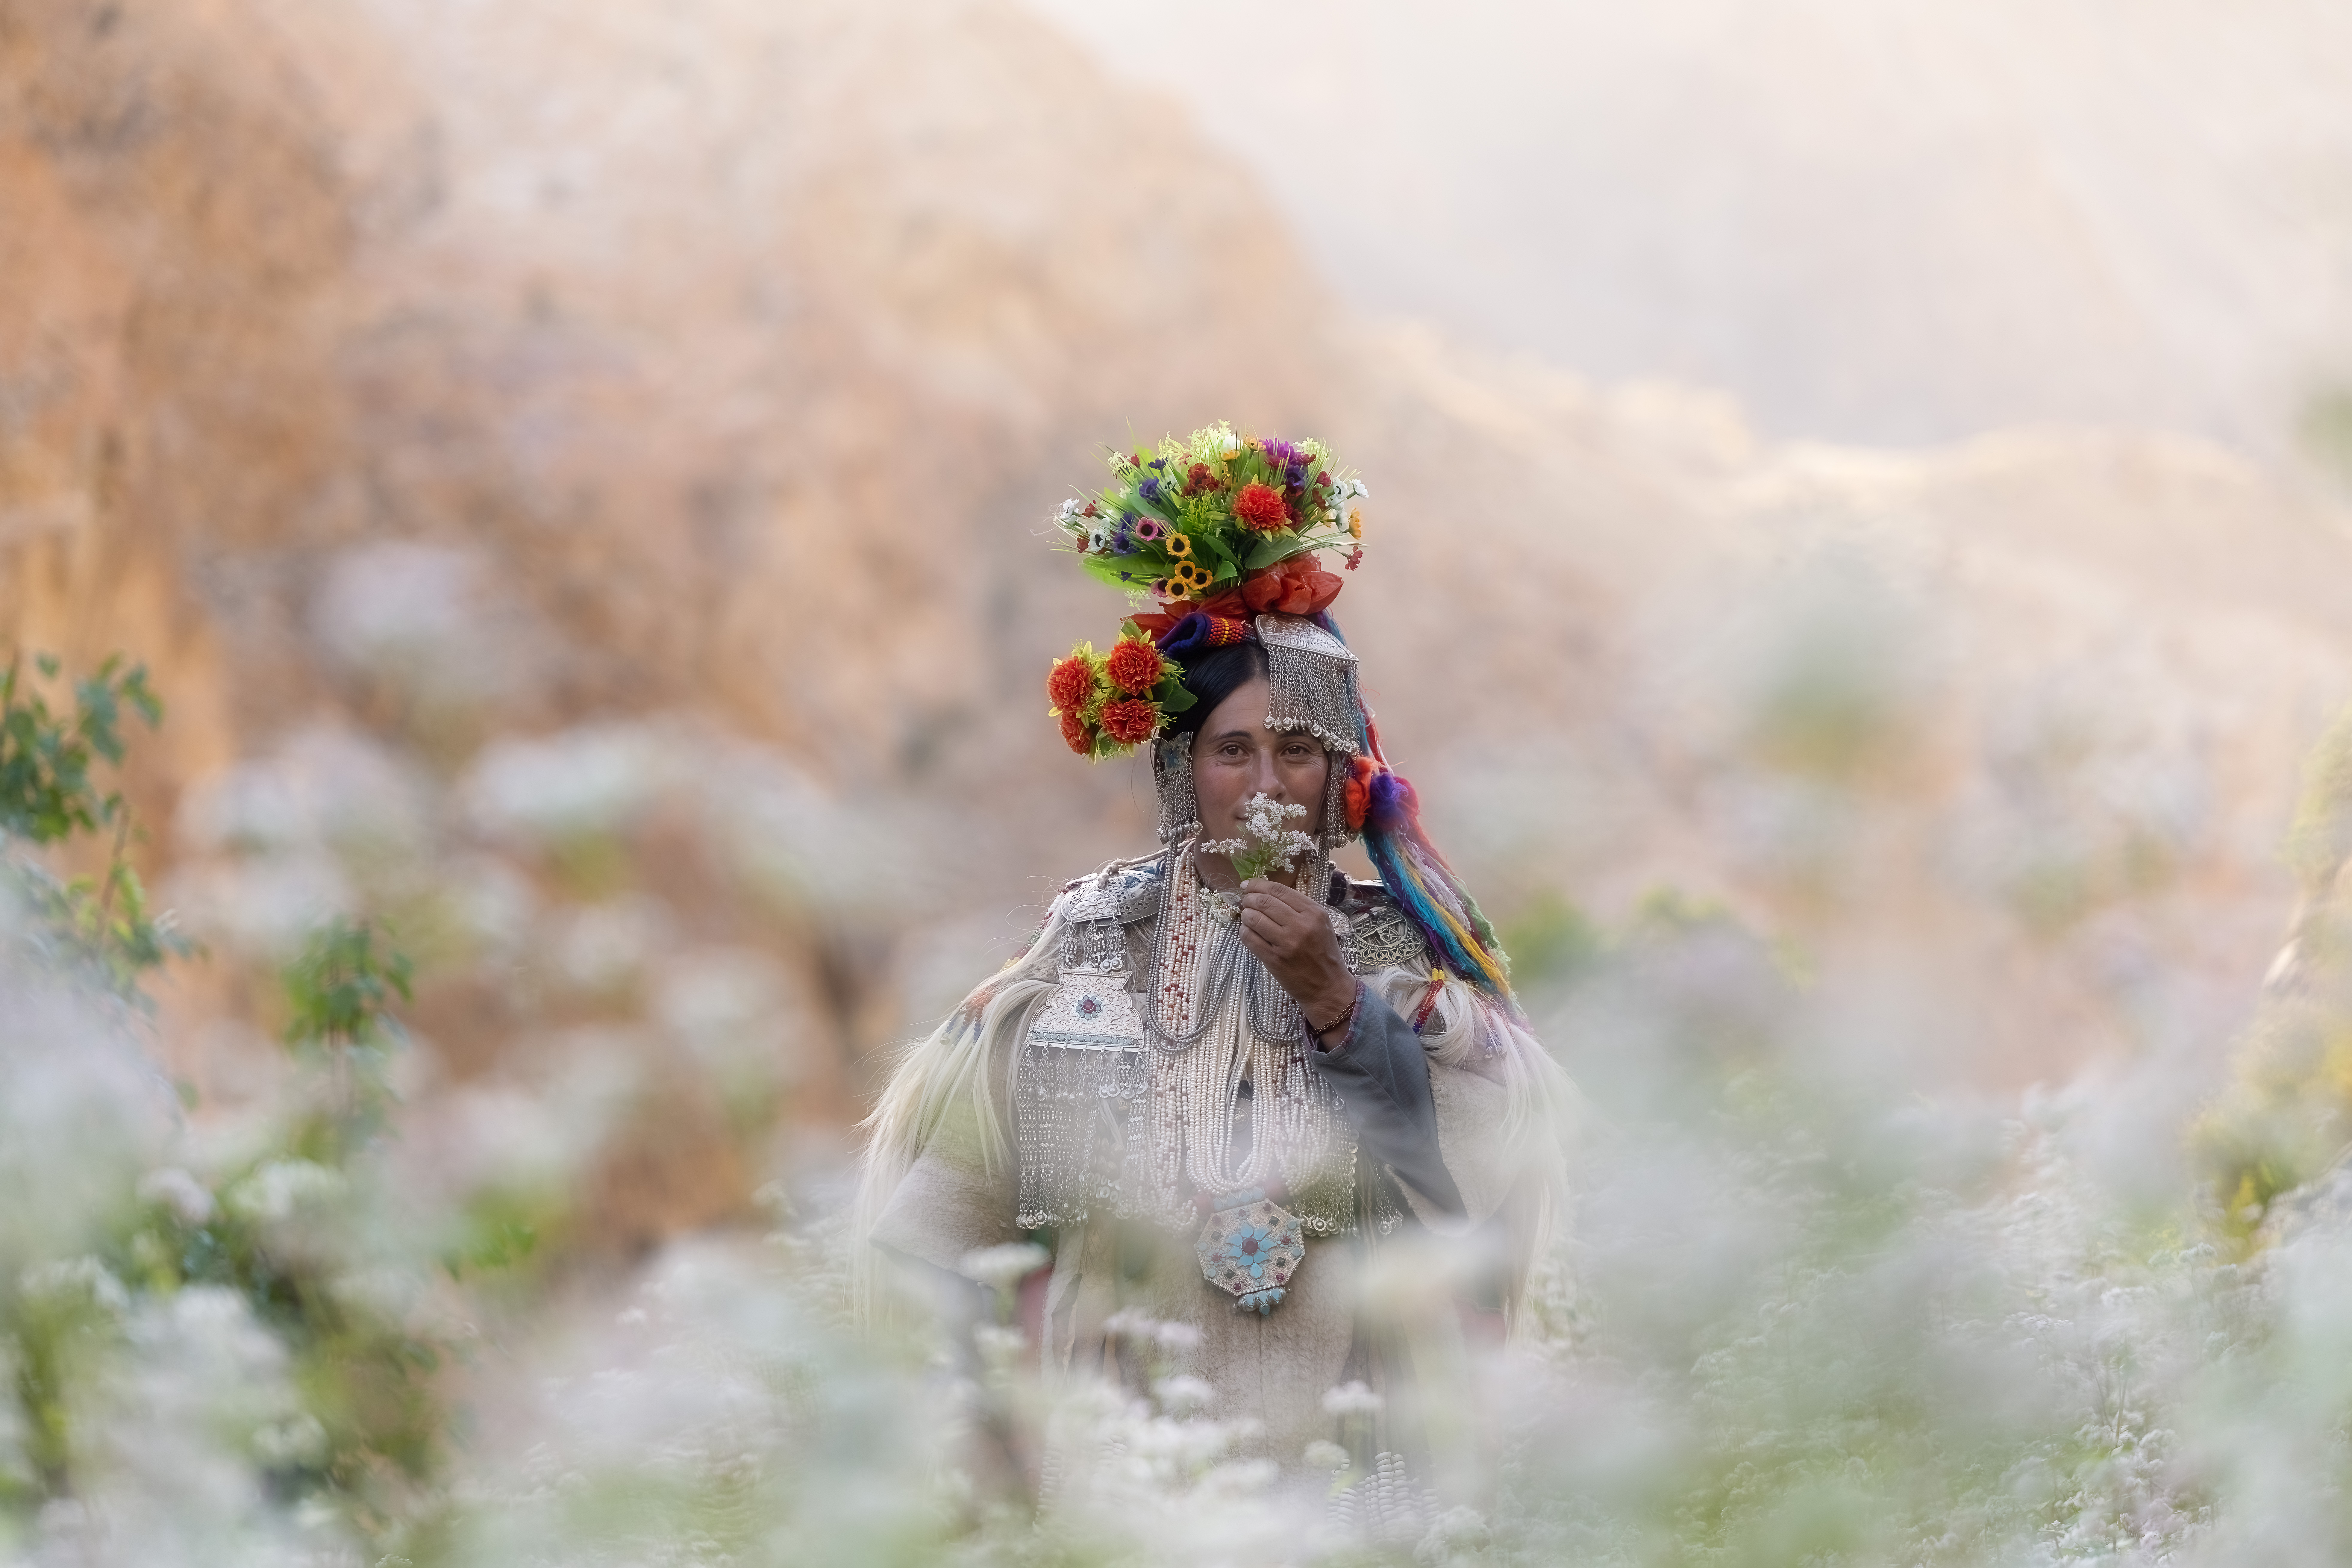 Photographing The Brokpa Tribes of Aryan Valley, Ladakh